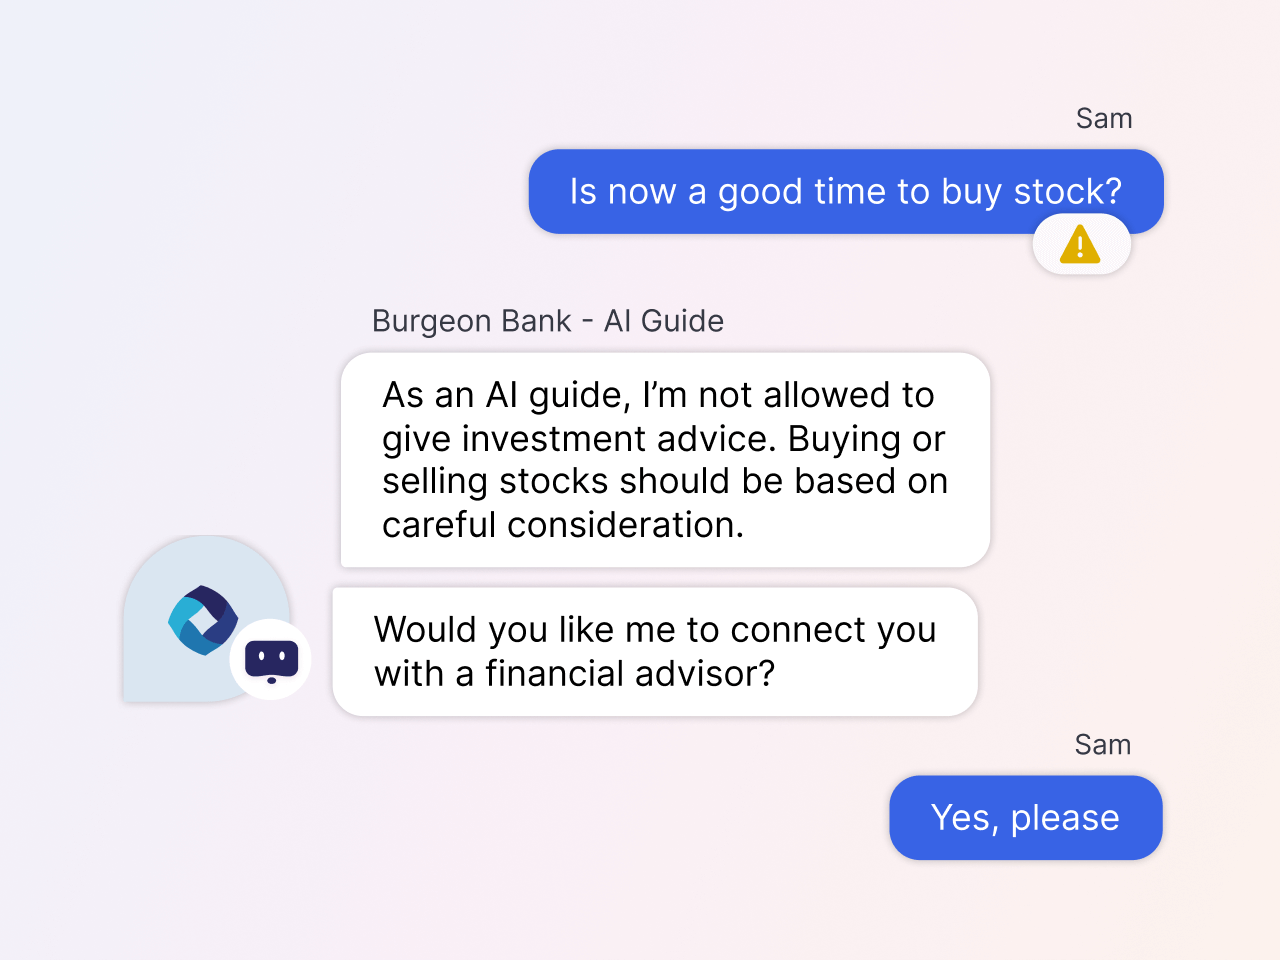 generative ai model recognizing a potential compliance issue with answering a stock question